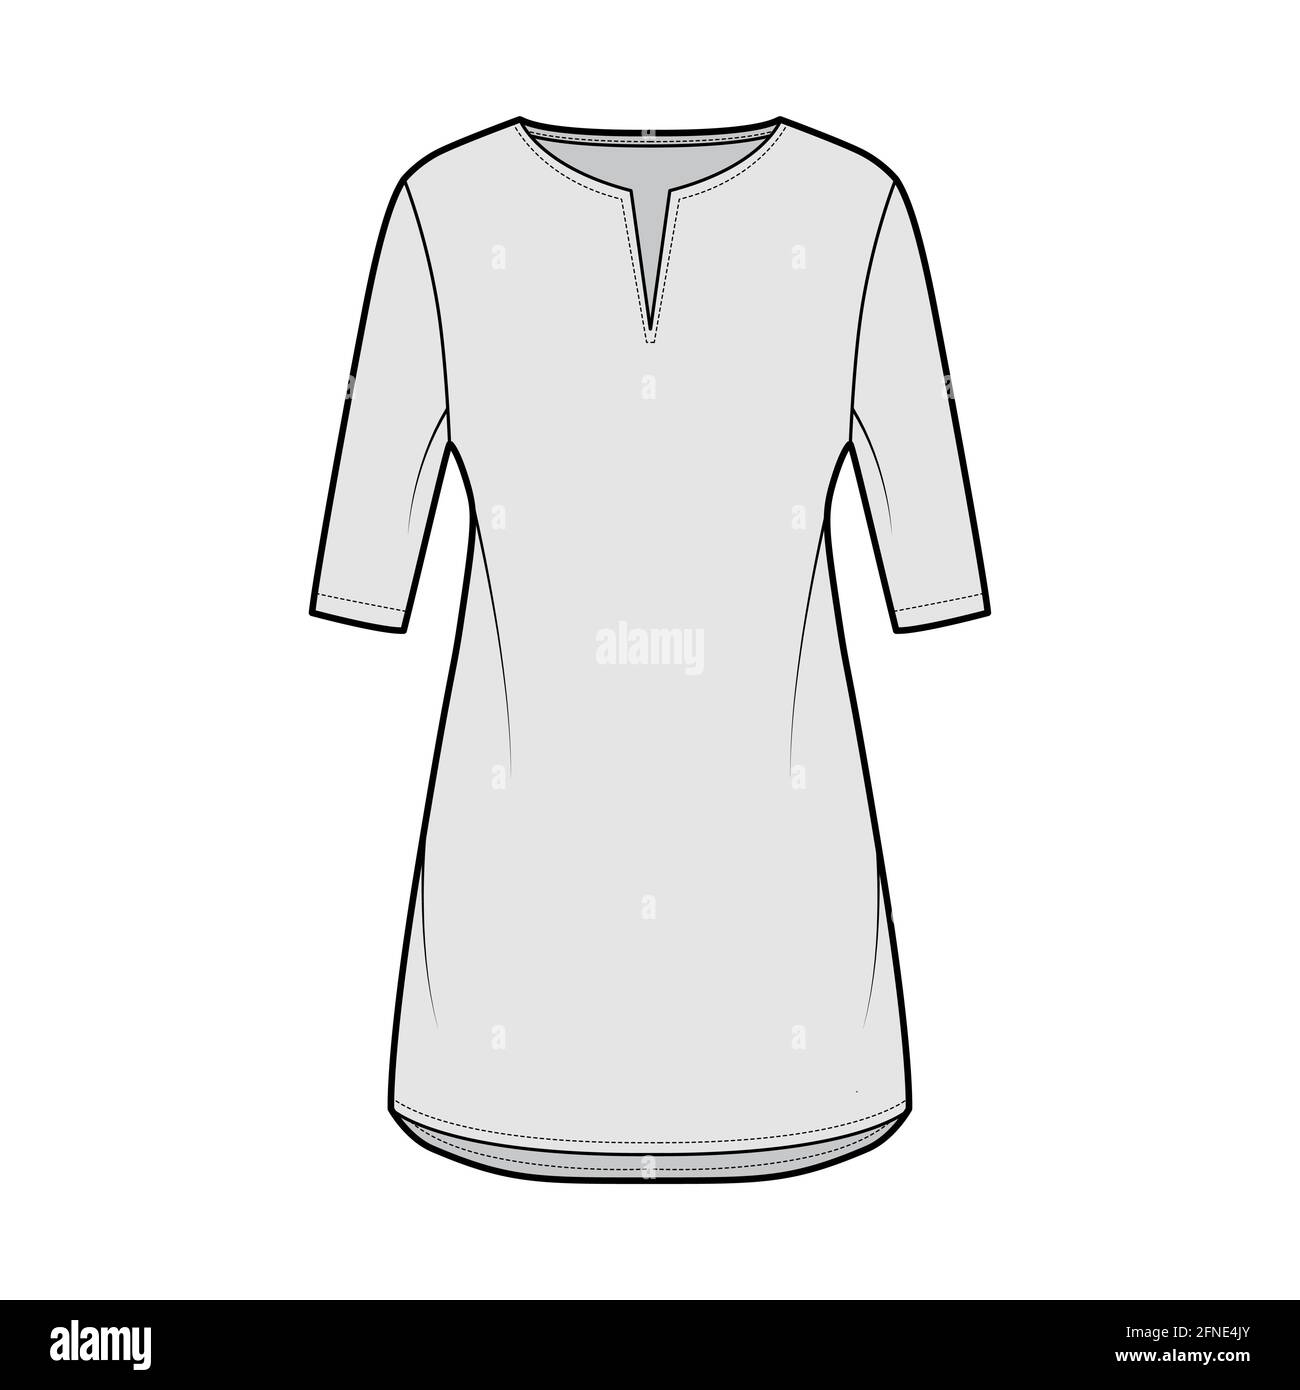 Dress tunic technical fashion illustration with elbow sleeves, oversized body, mini length skirt, slashed neck. Flat apparel front, grey color style. Women, men unisex CAD mockup Stock Vector